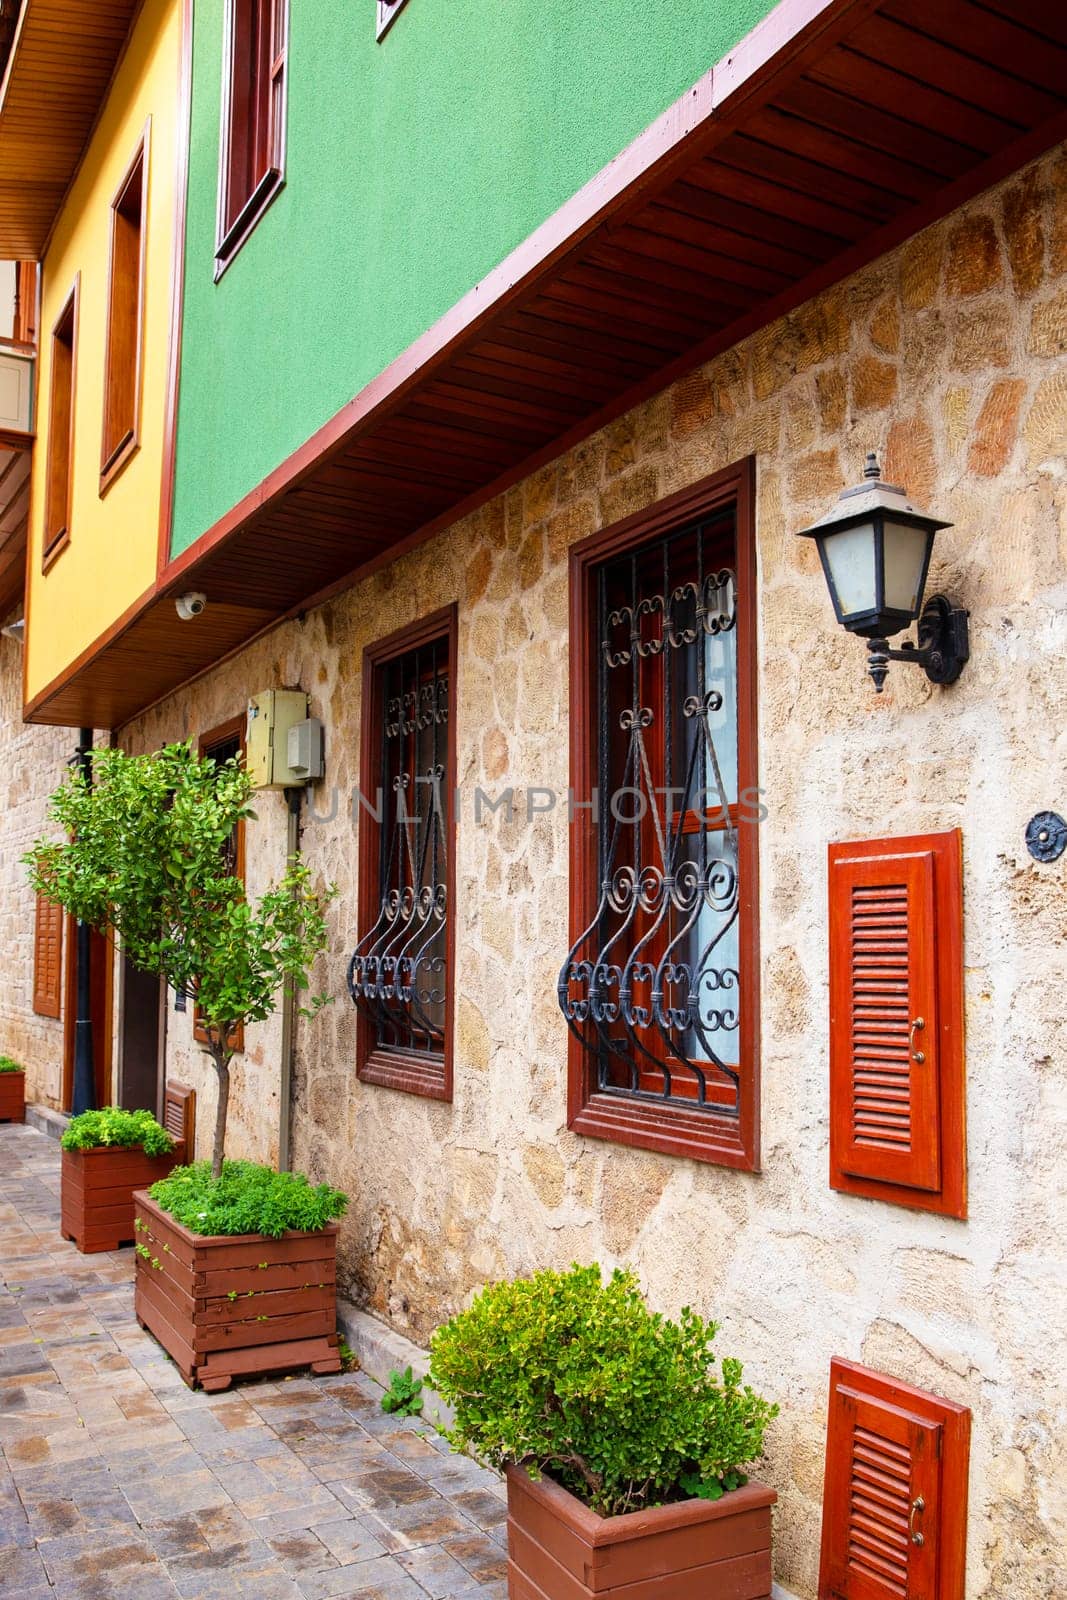 Traditional houses in the old town. Ancient architecture. Antalya, Turkey